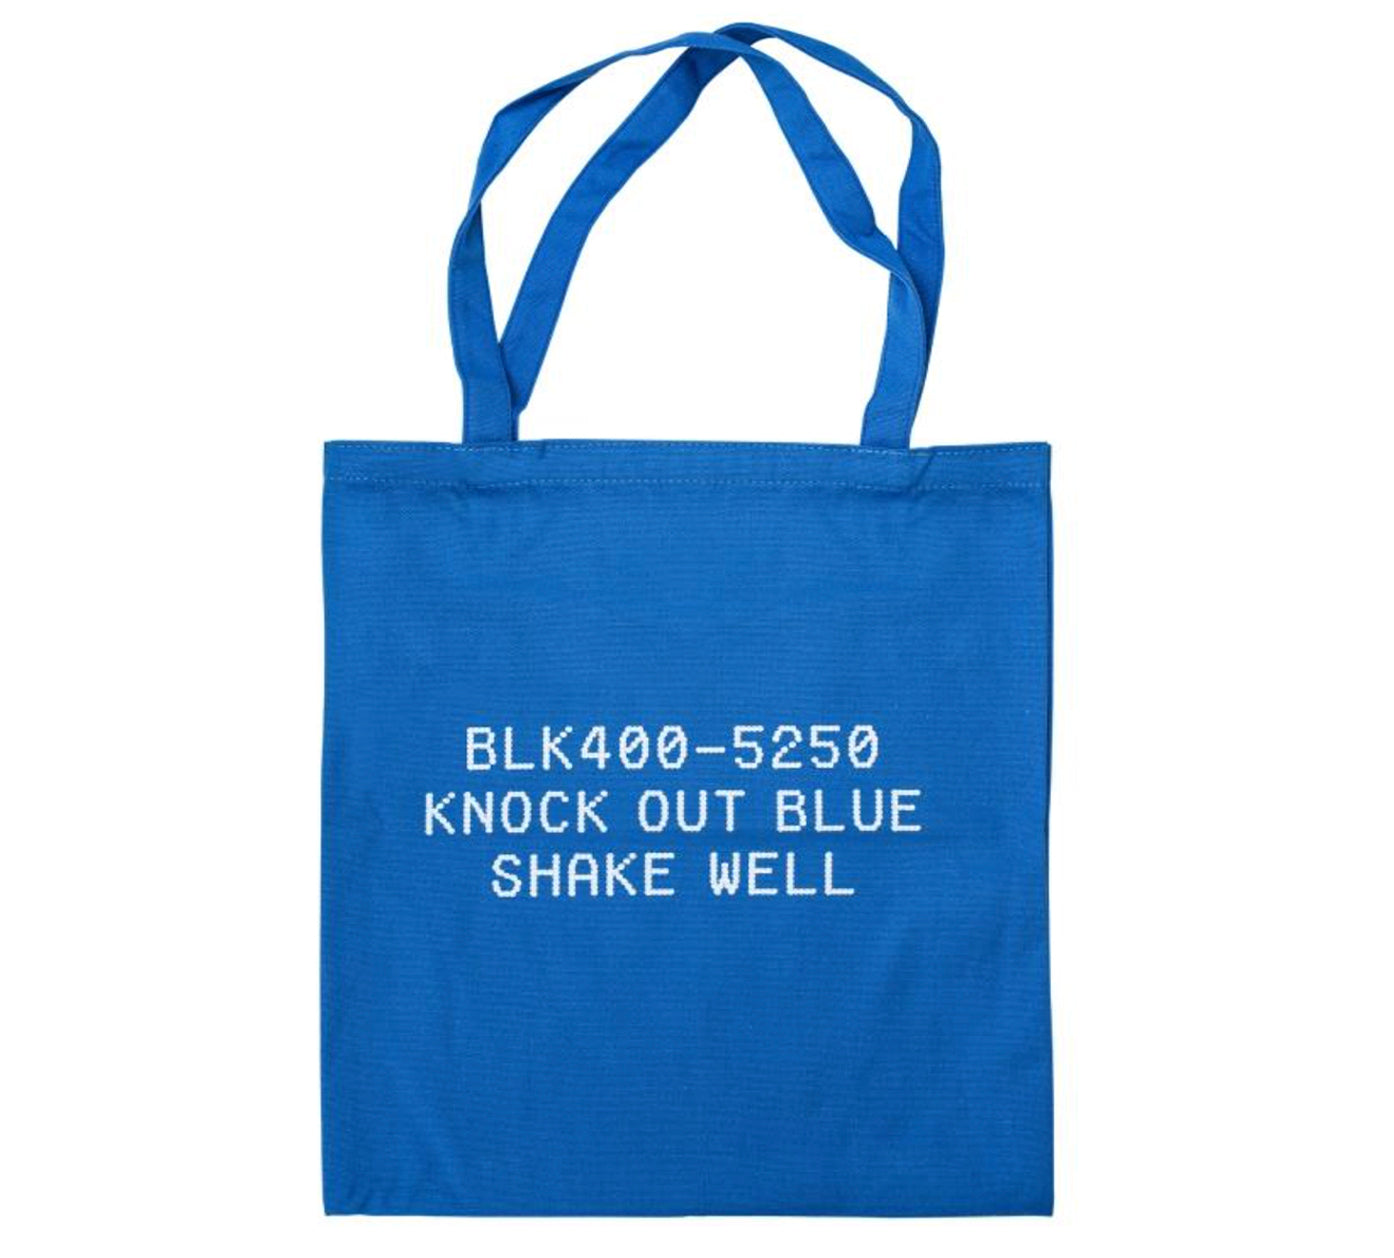 Montana Cans / Donut 2093 Blue tote bag